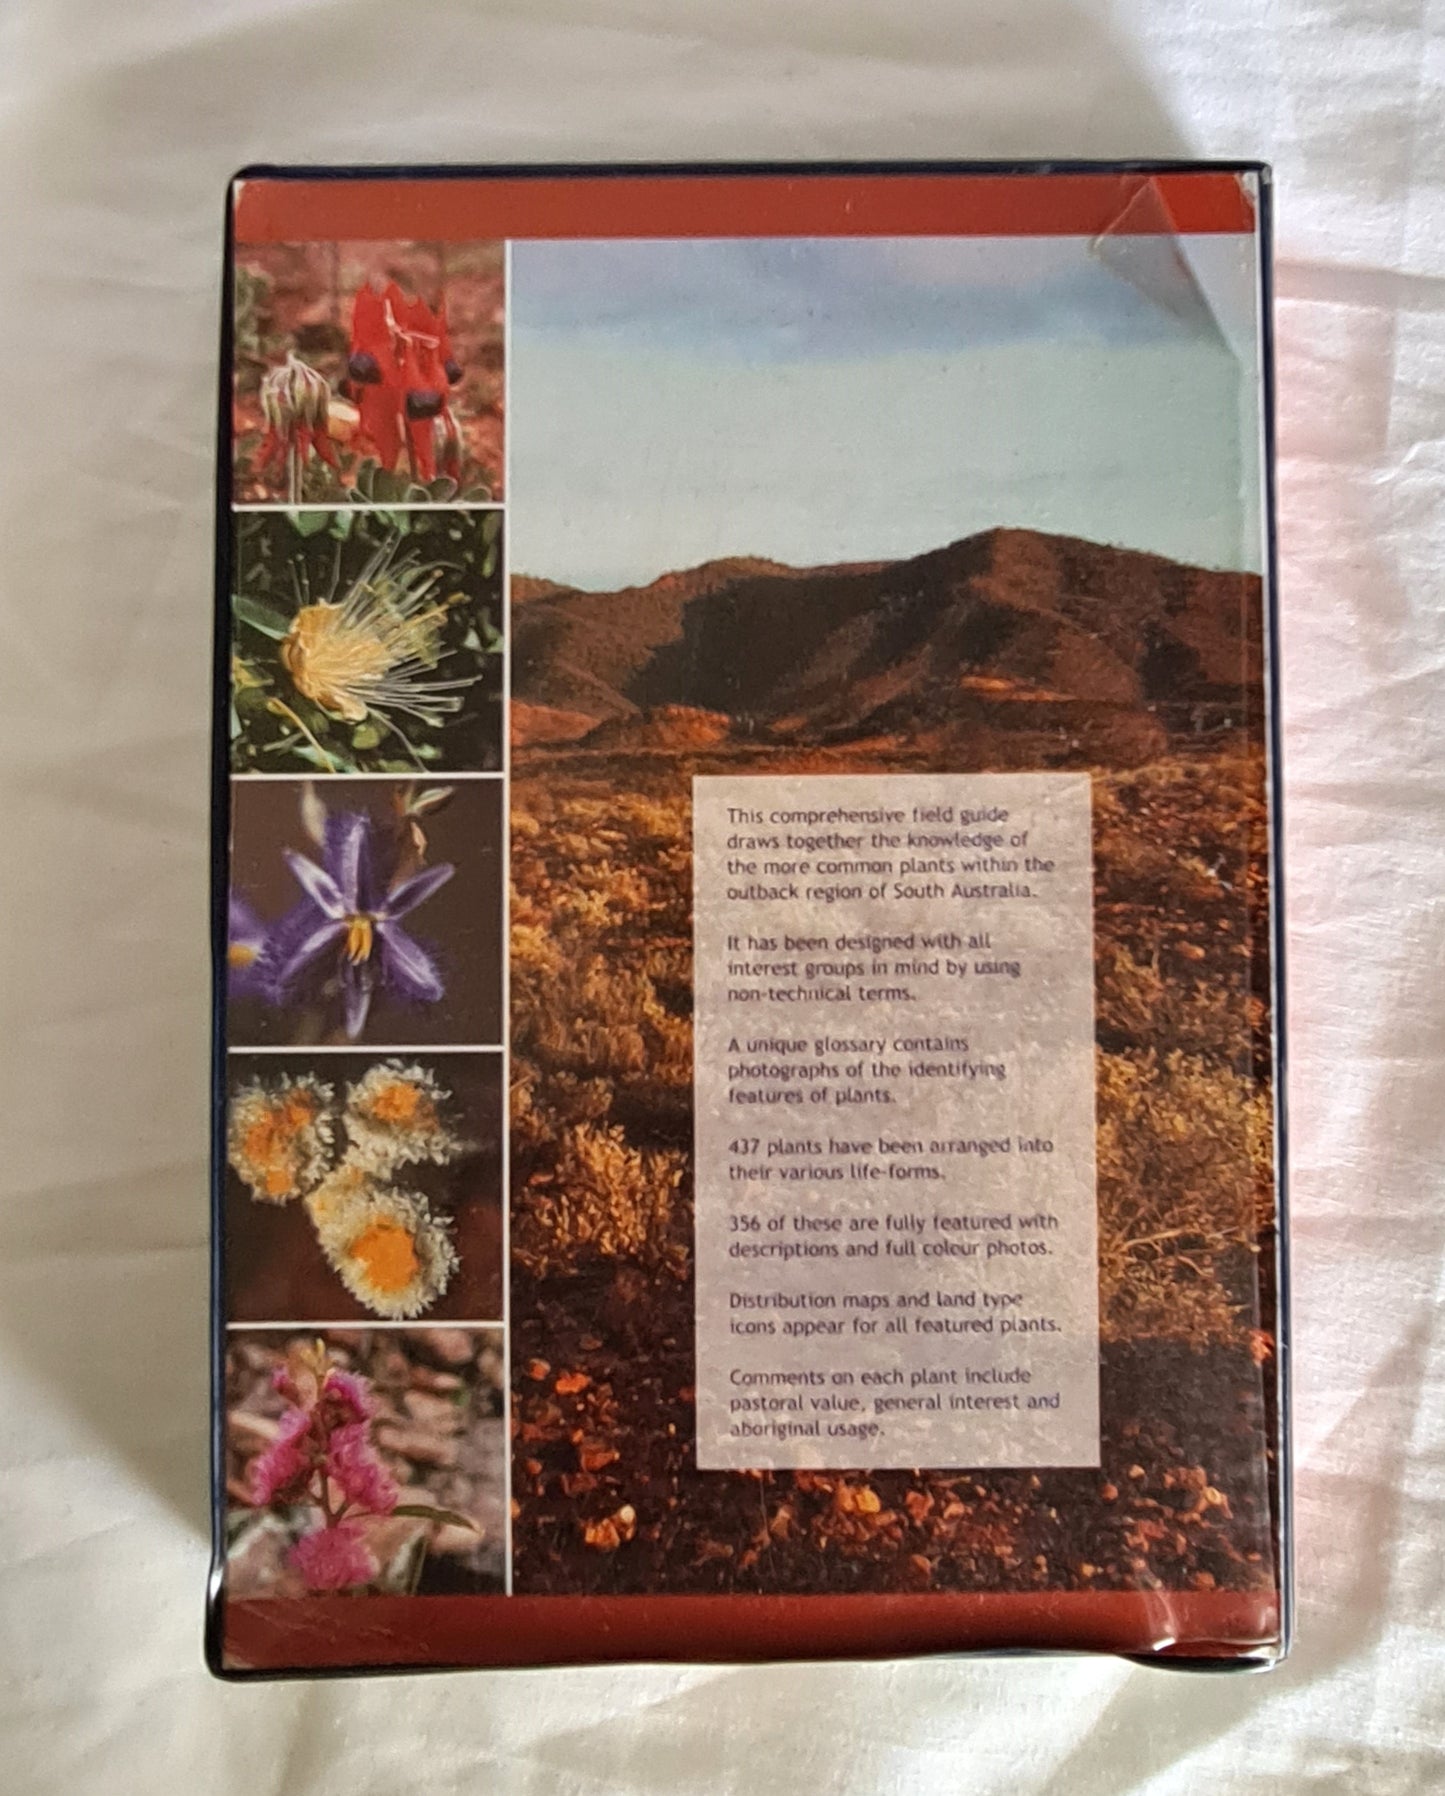 Field Guide to the Plants of Outback South Australia by Frank Kutsche and Brendan Lay